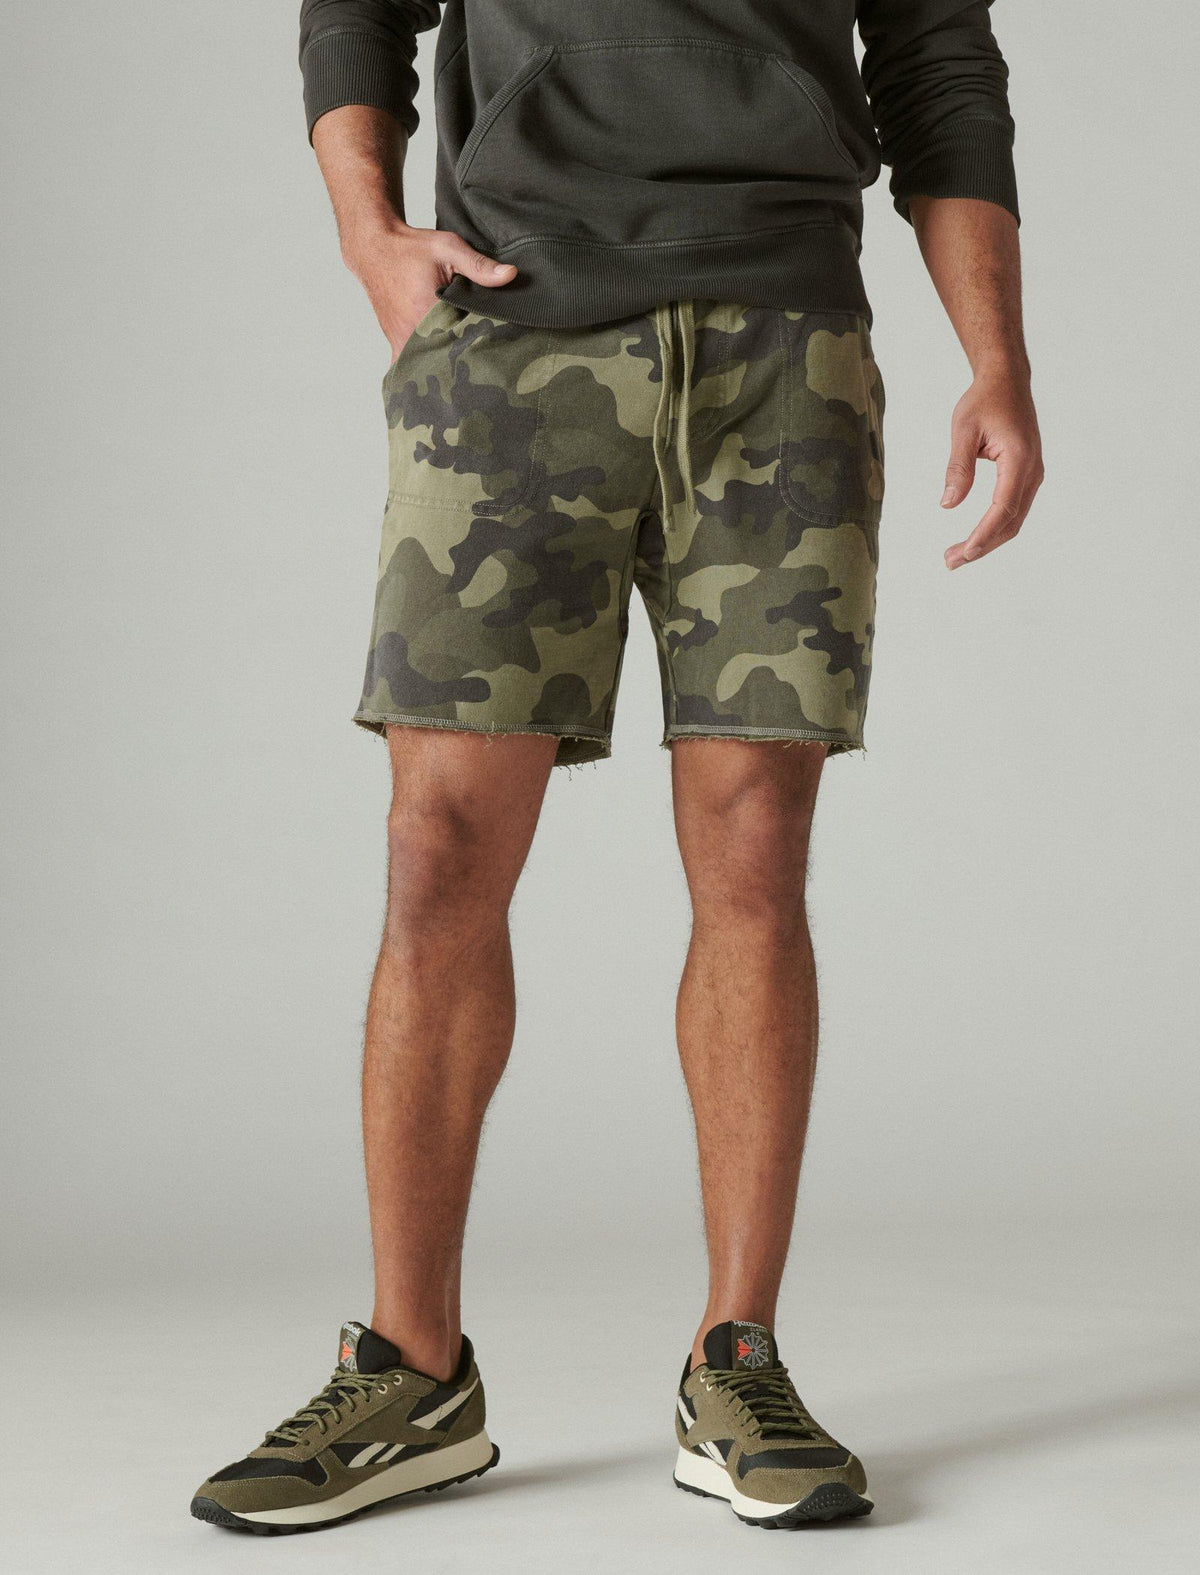 Lucky Brand Sueded Terry Camo Short Camo (Army Colors)